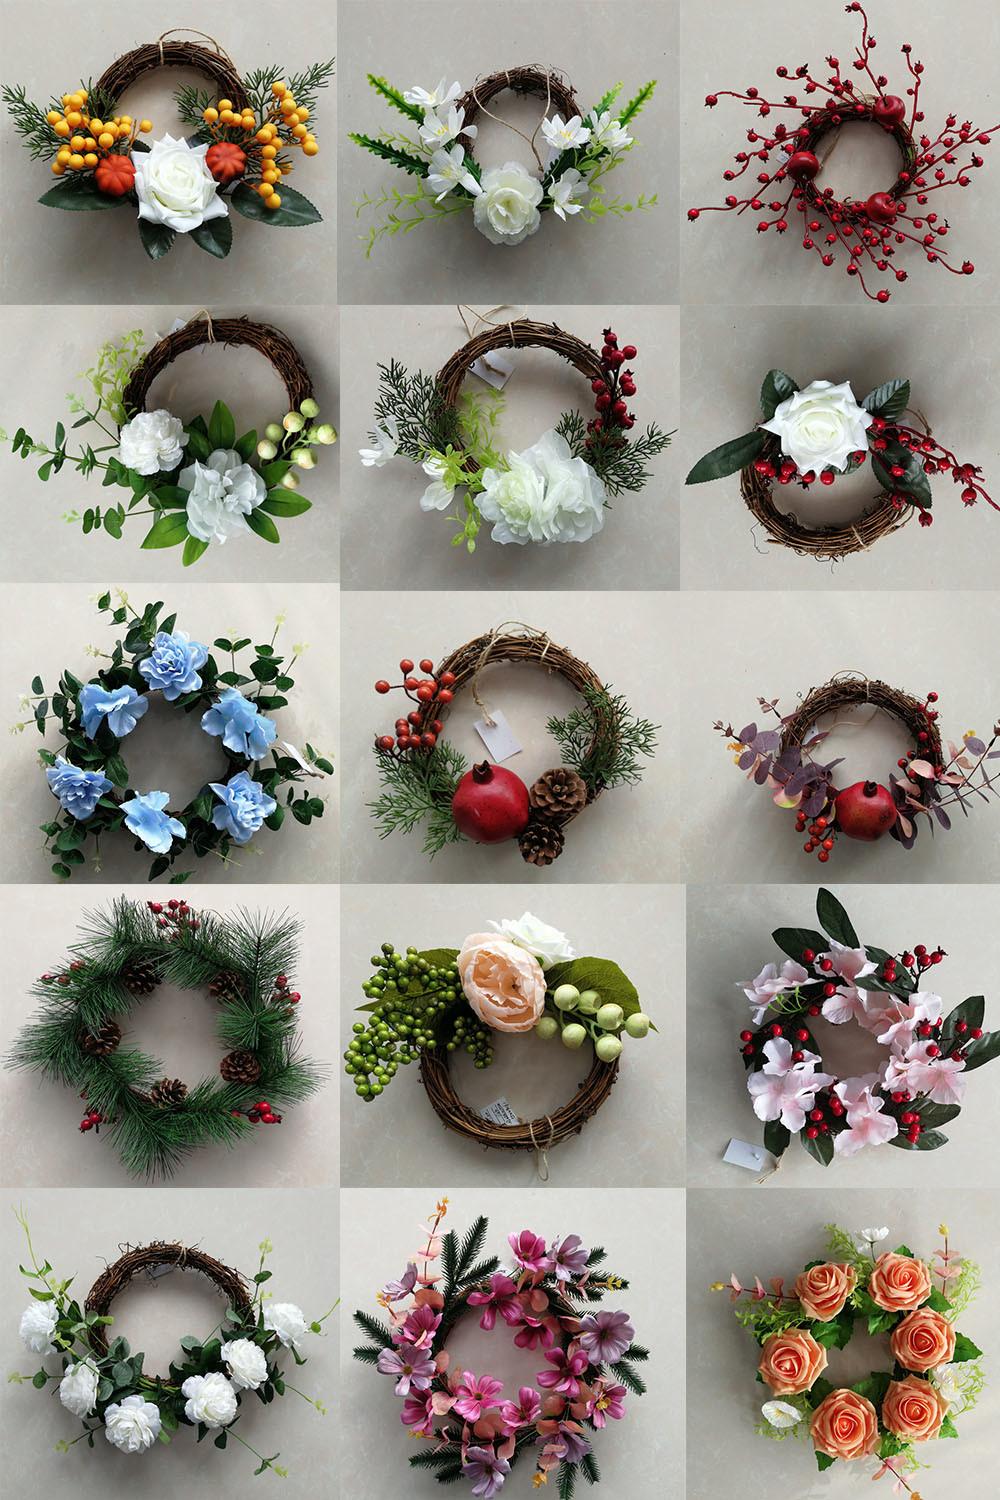 OEM Plastic Artificial Xmas Wreath with Ornaments Decorate Home Decoration